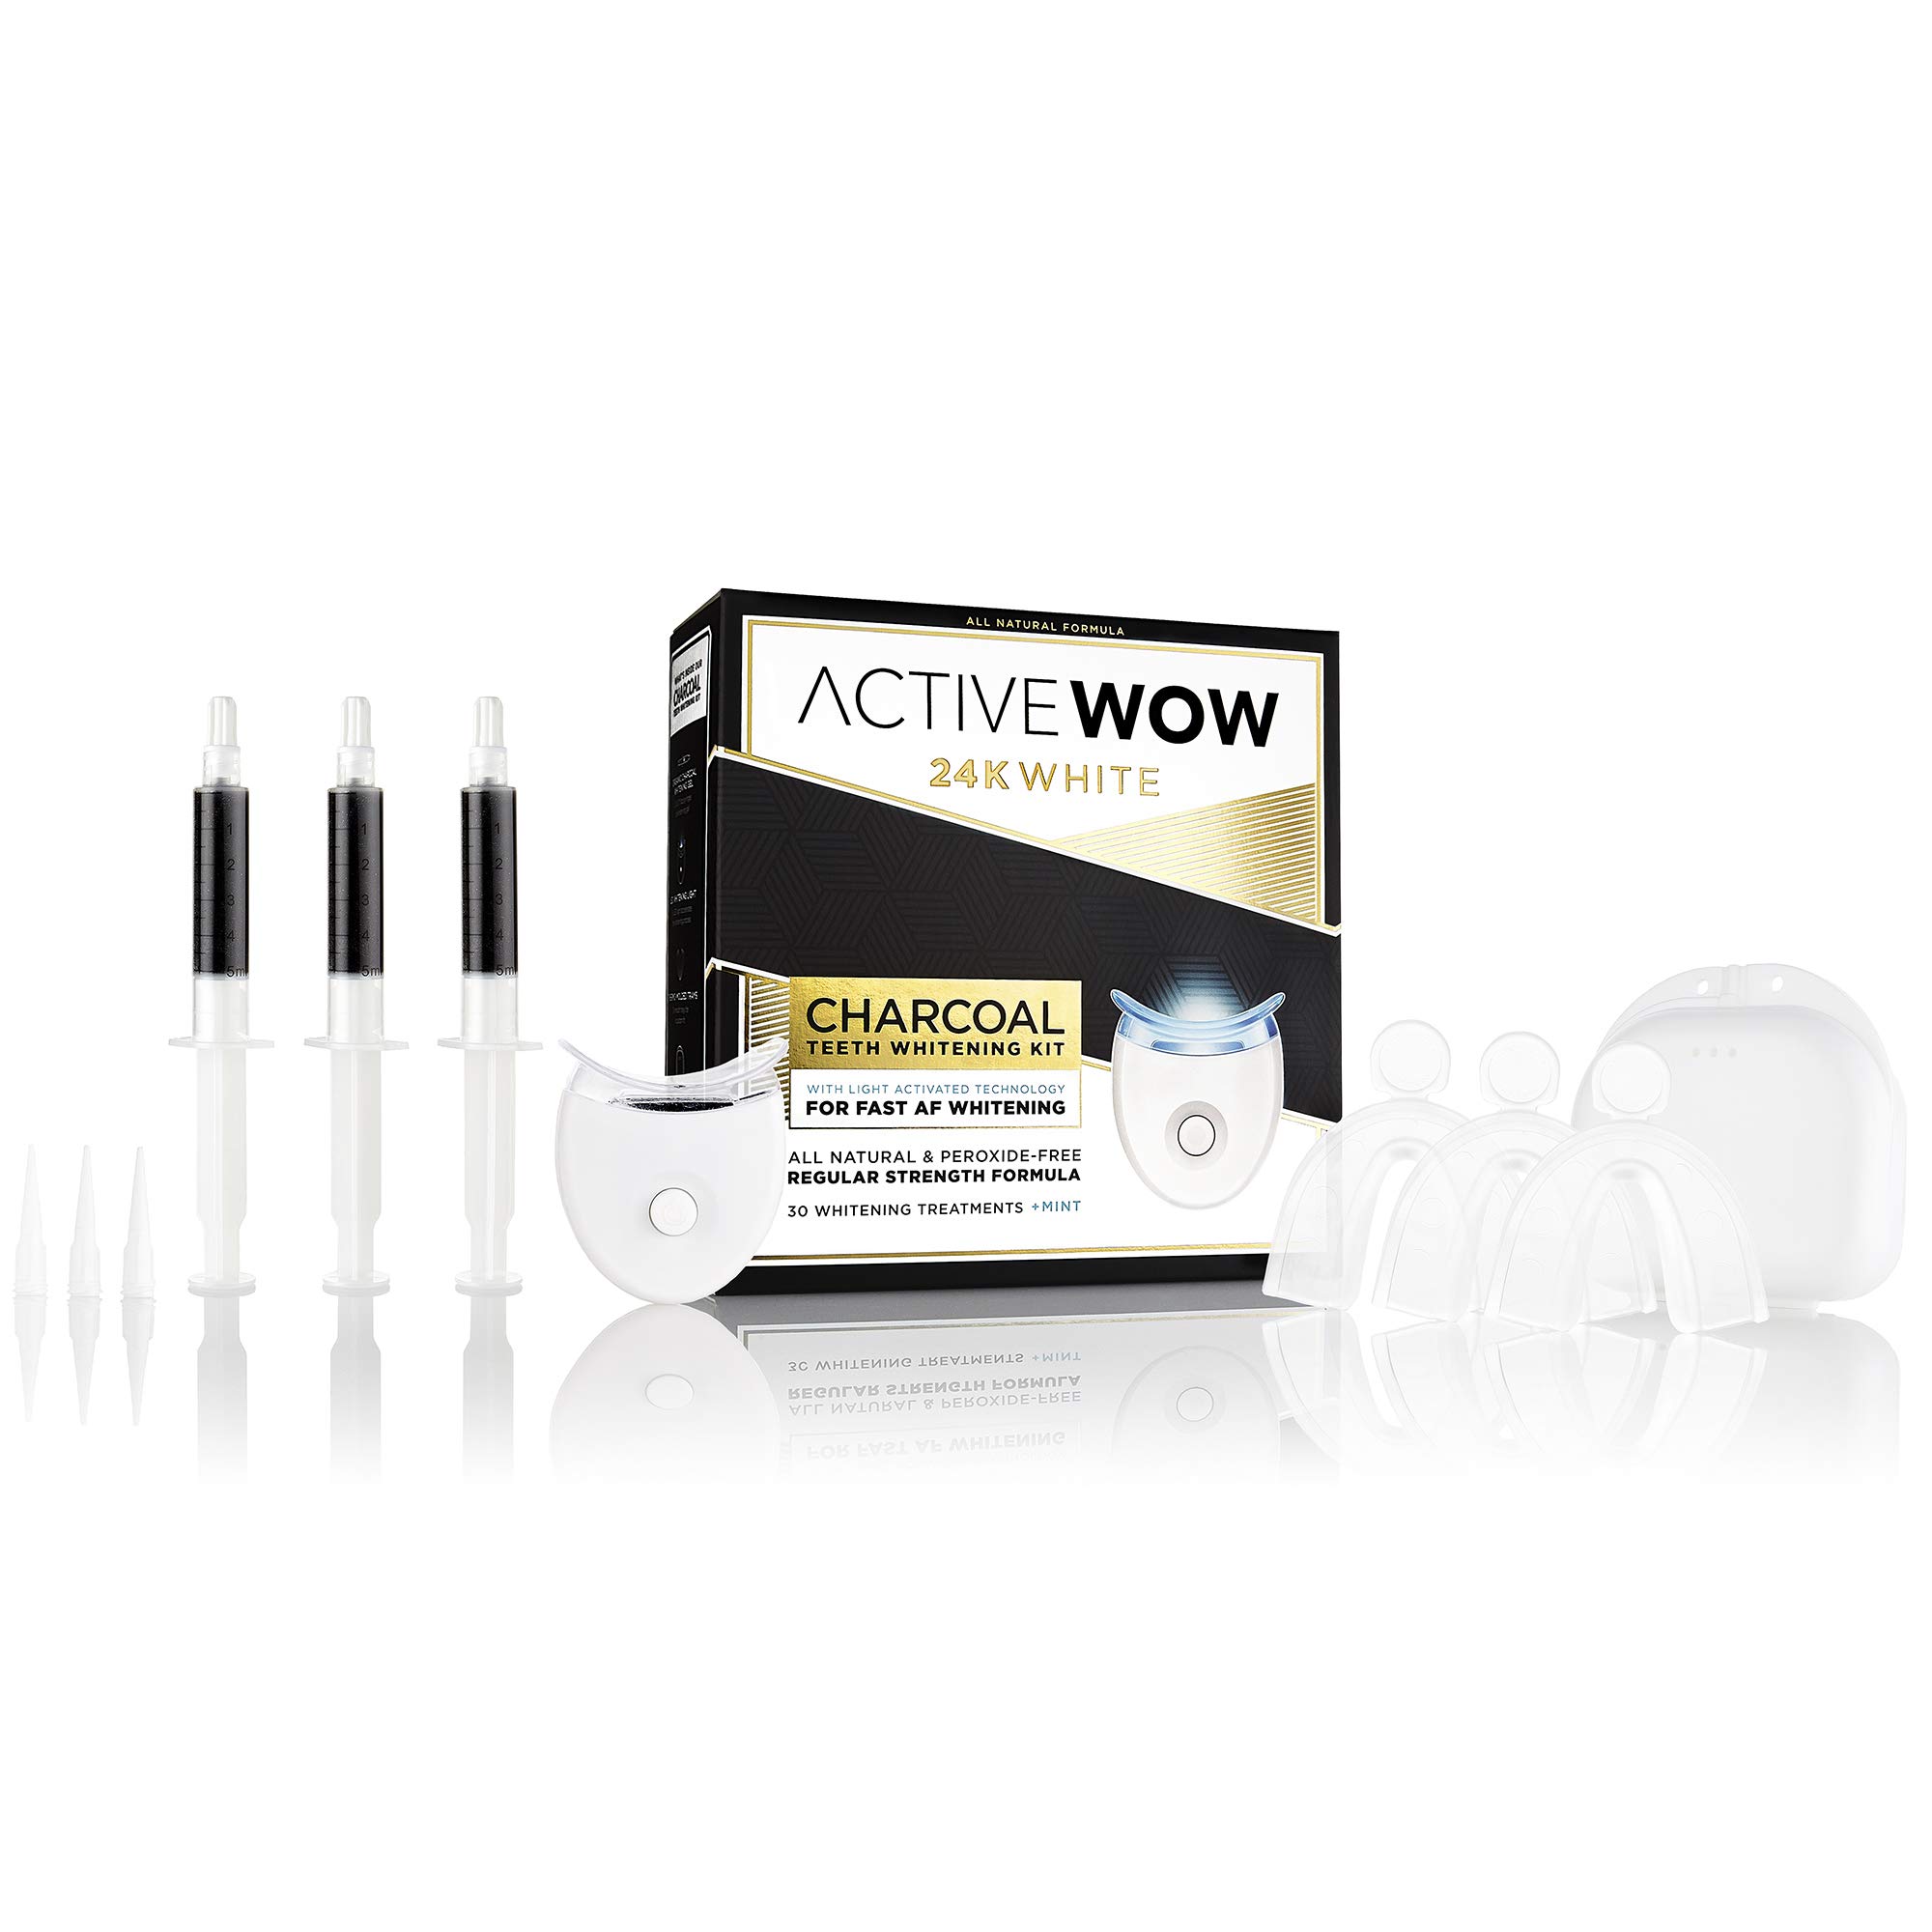 Active Wow 24k White Charcoal Teeth Whitening Kit - LED Teeth Whitening Kit, Teeth Whitening Light, All Natural Formula, Fluoride Free, Teeth Whitening Kit with LED Light - Mint Flavor, 30 Treatments